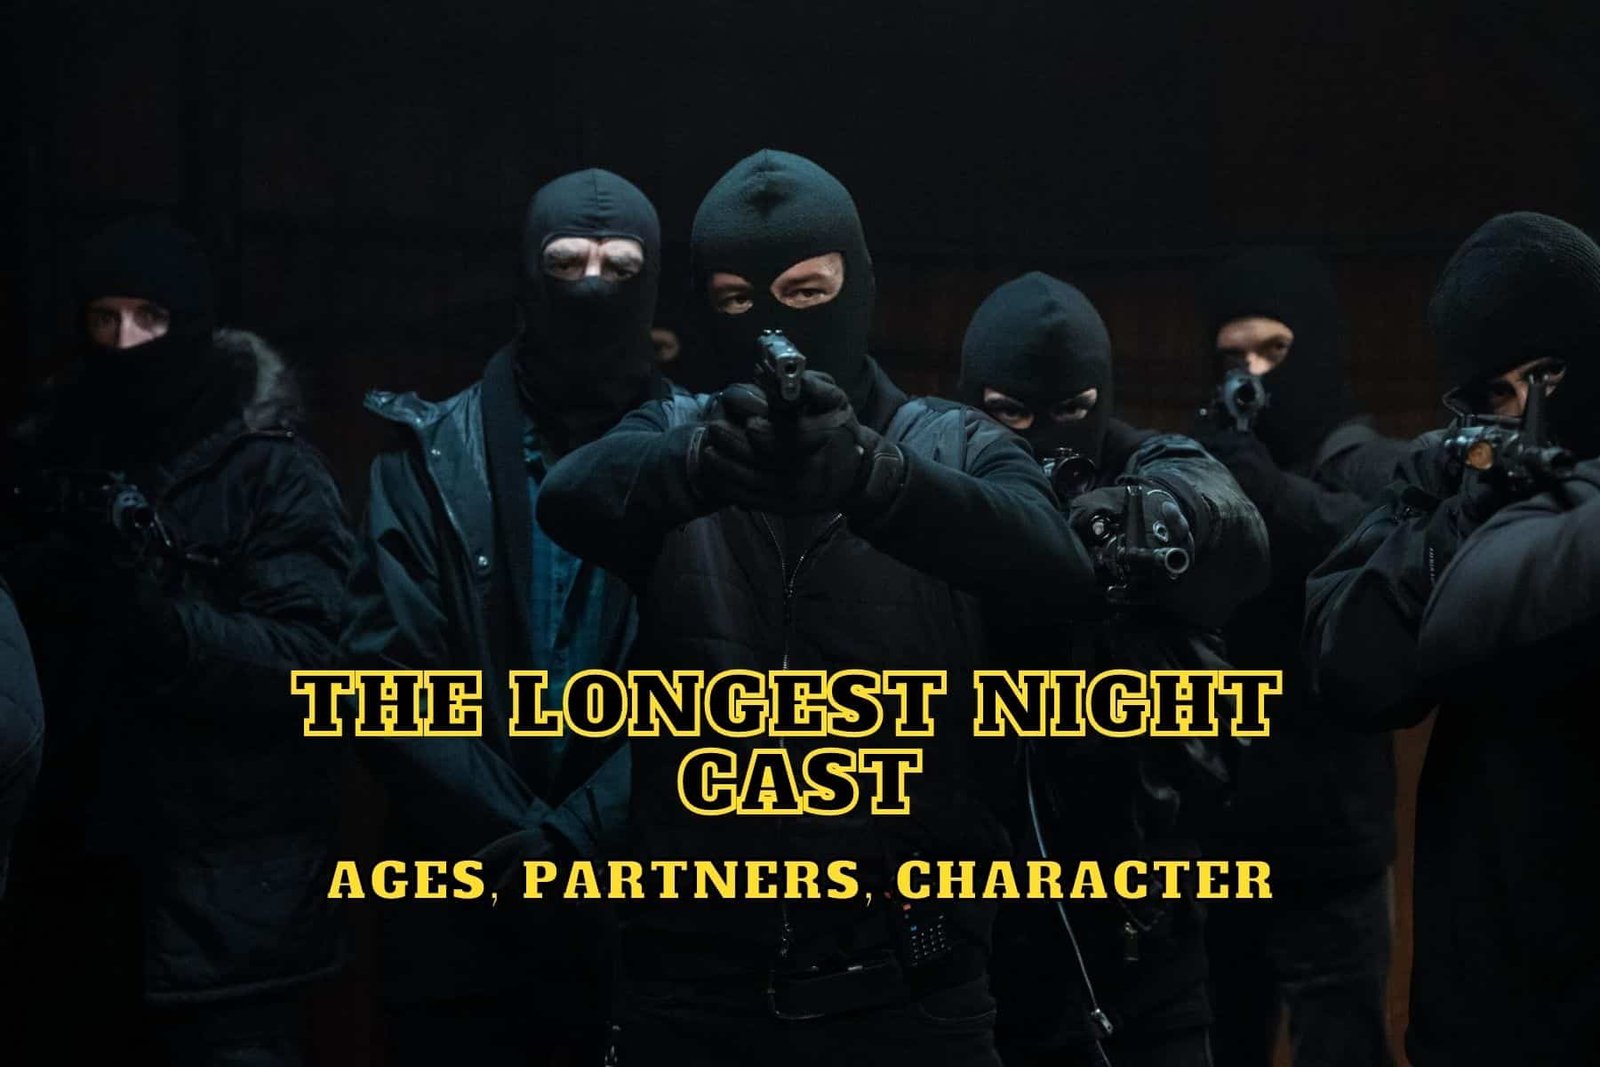 The Longest Night Cast - Ages, Partners, Characters